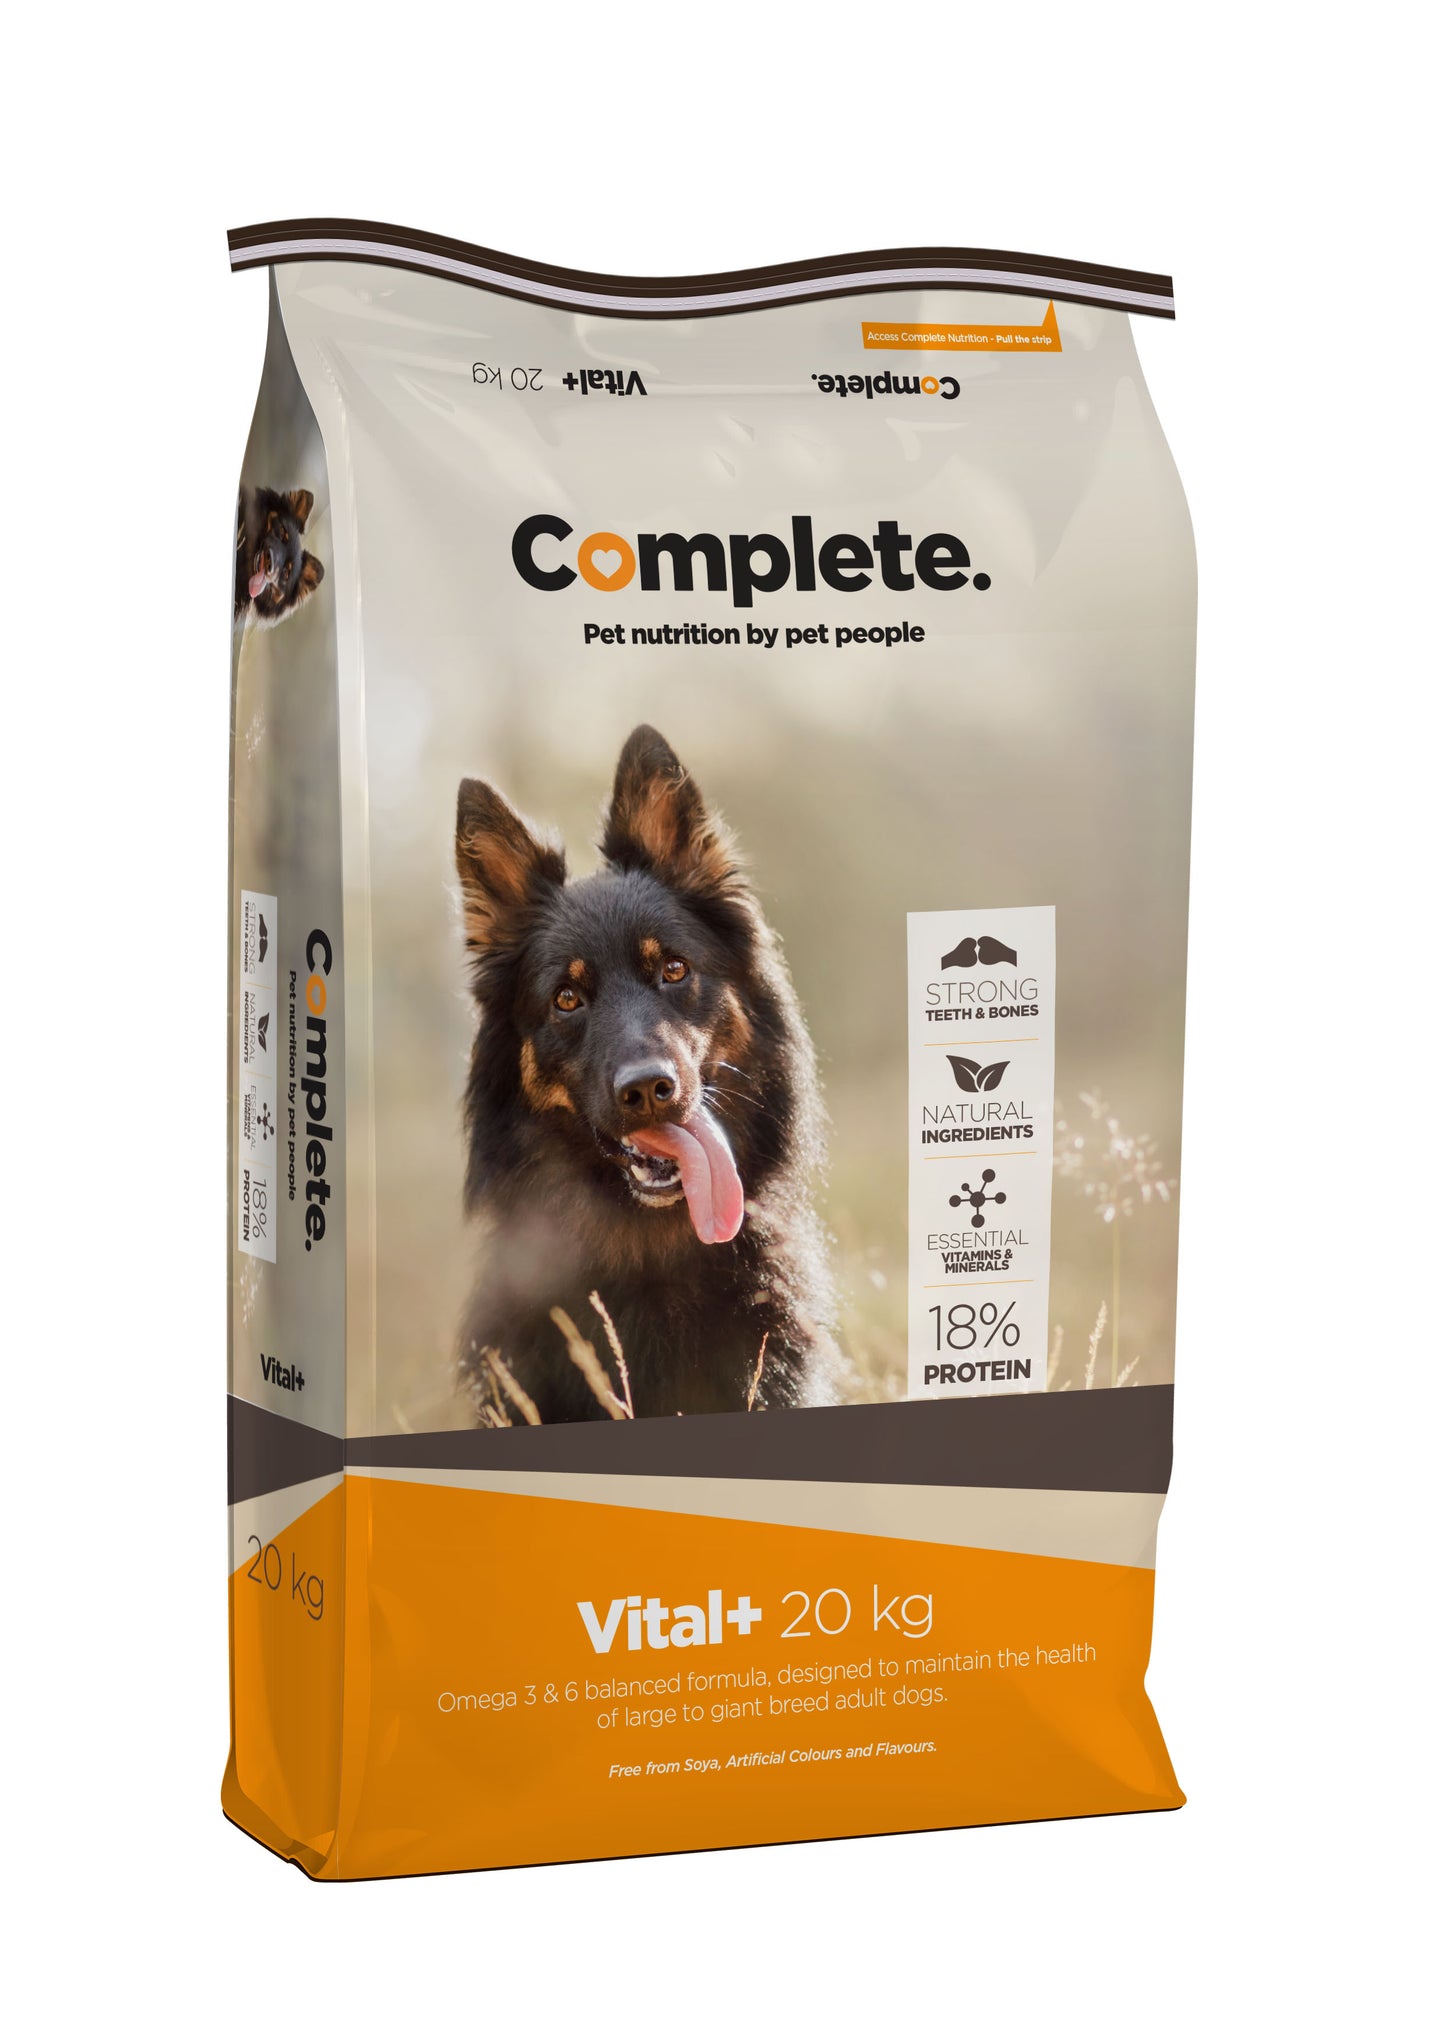 Vital+ 20kg Complete Pet Food For Large & Giant breed adult dogs from Pets Planet - South Africa’s No.1 Online Pet Store for premium pet products, best pet store near me, Dog food, pet food, dog wet food, dog bed, dog beds, washable dog bed, takealot dog bed, plush dog bed, Complete Pet Nutrition, Complete pet nutrition dog food, hills dog food, optimizor dog food, royal canin dog food, jock dog food, bobtail dog food, canine cuisine, acana dog food, best dog food, dog food near me, best dog food brands